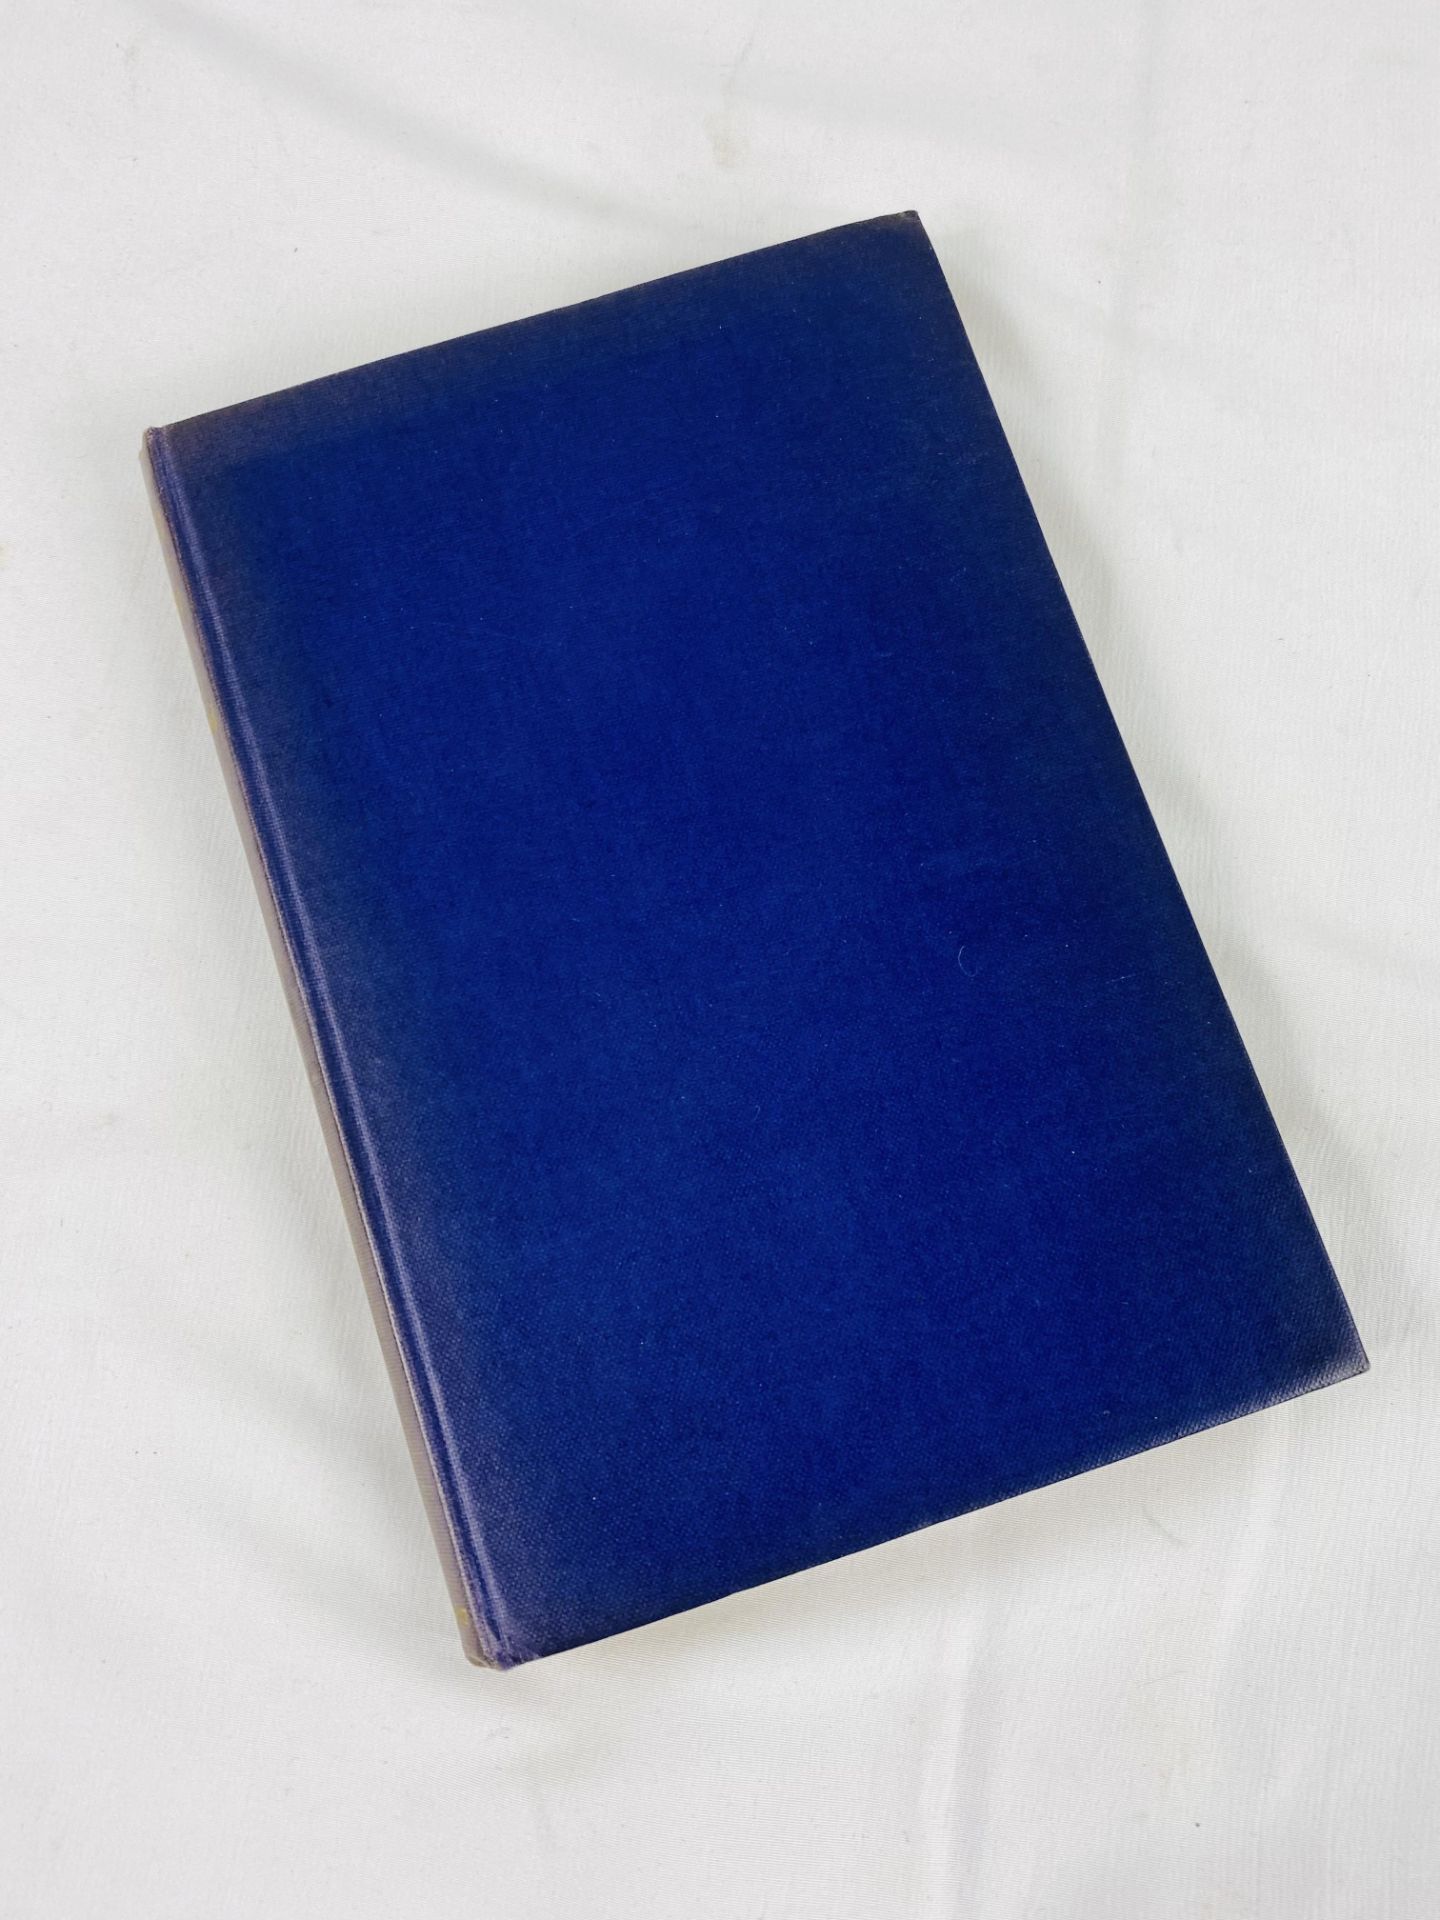 Noel Coward, Middle East Diary, first edition, William Heinemann Ltd, 1944 - Image 6 of 7